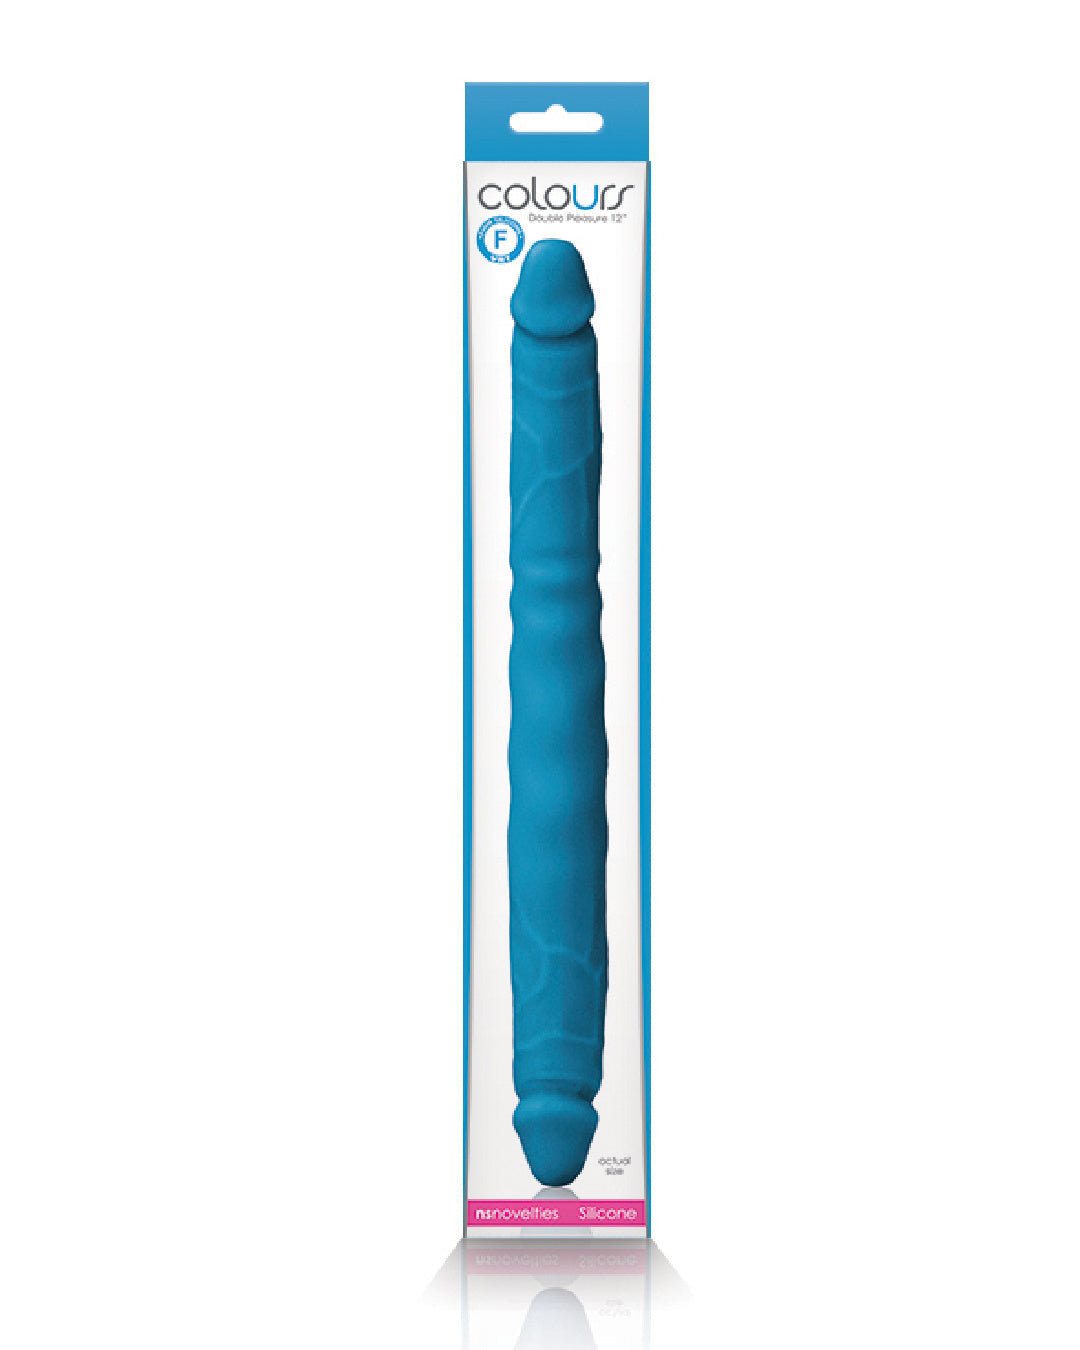 Colours 12 Inch Double Ended Dildo - Blue in the box